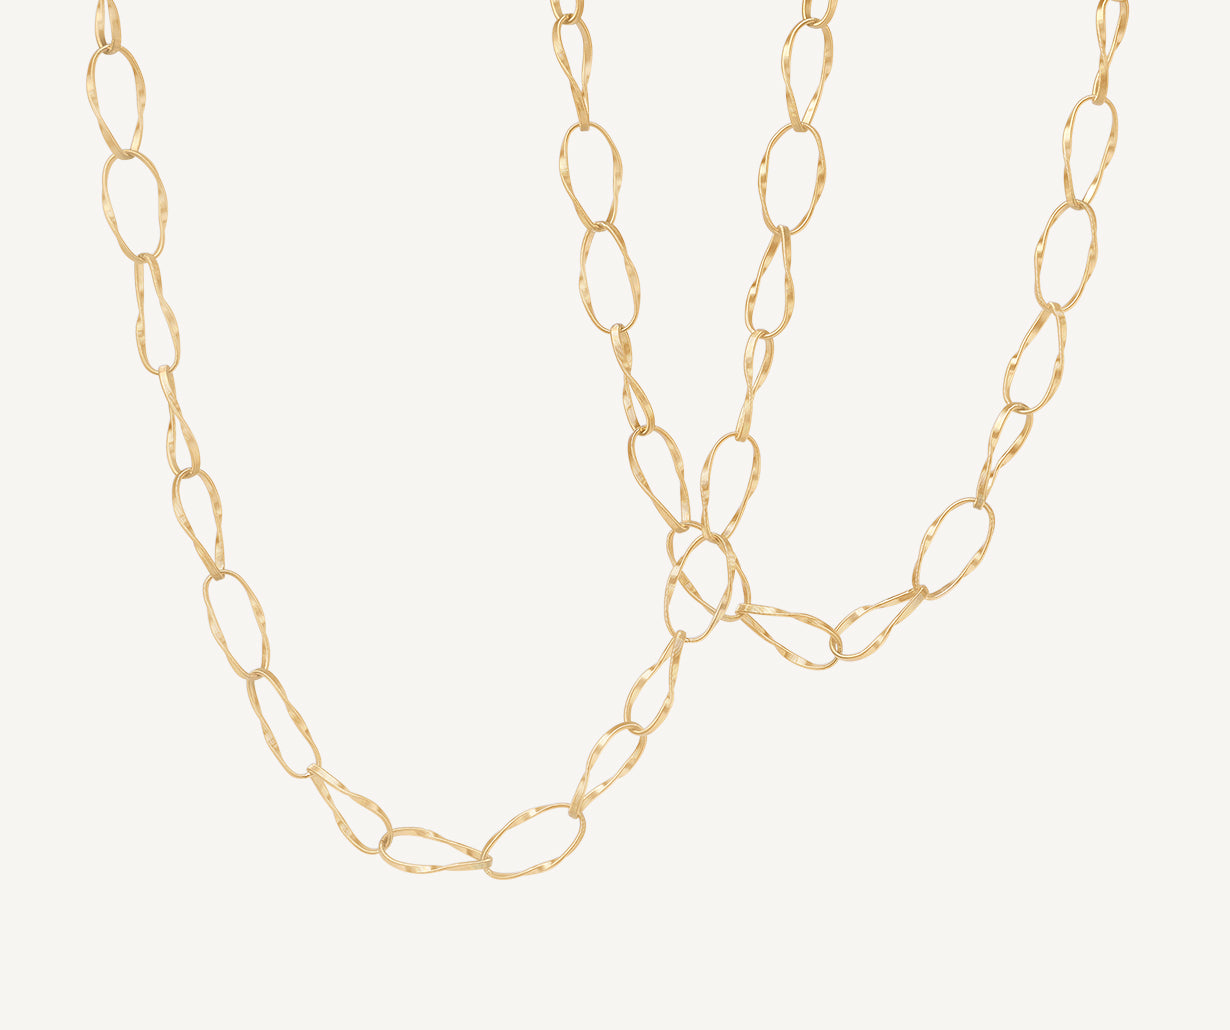 Marco Bicego Marrakech Onde long chain necklace in yellow gold layered wirh Marrakech Onde necklace worn on model